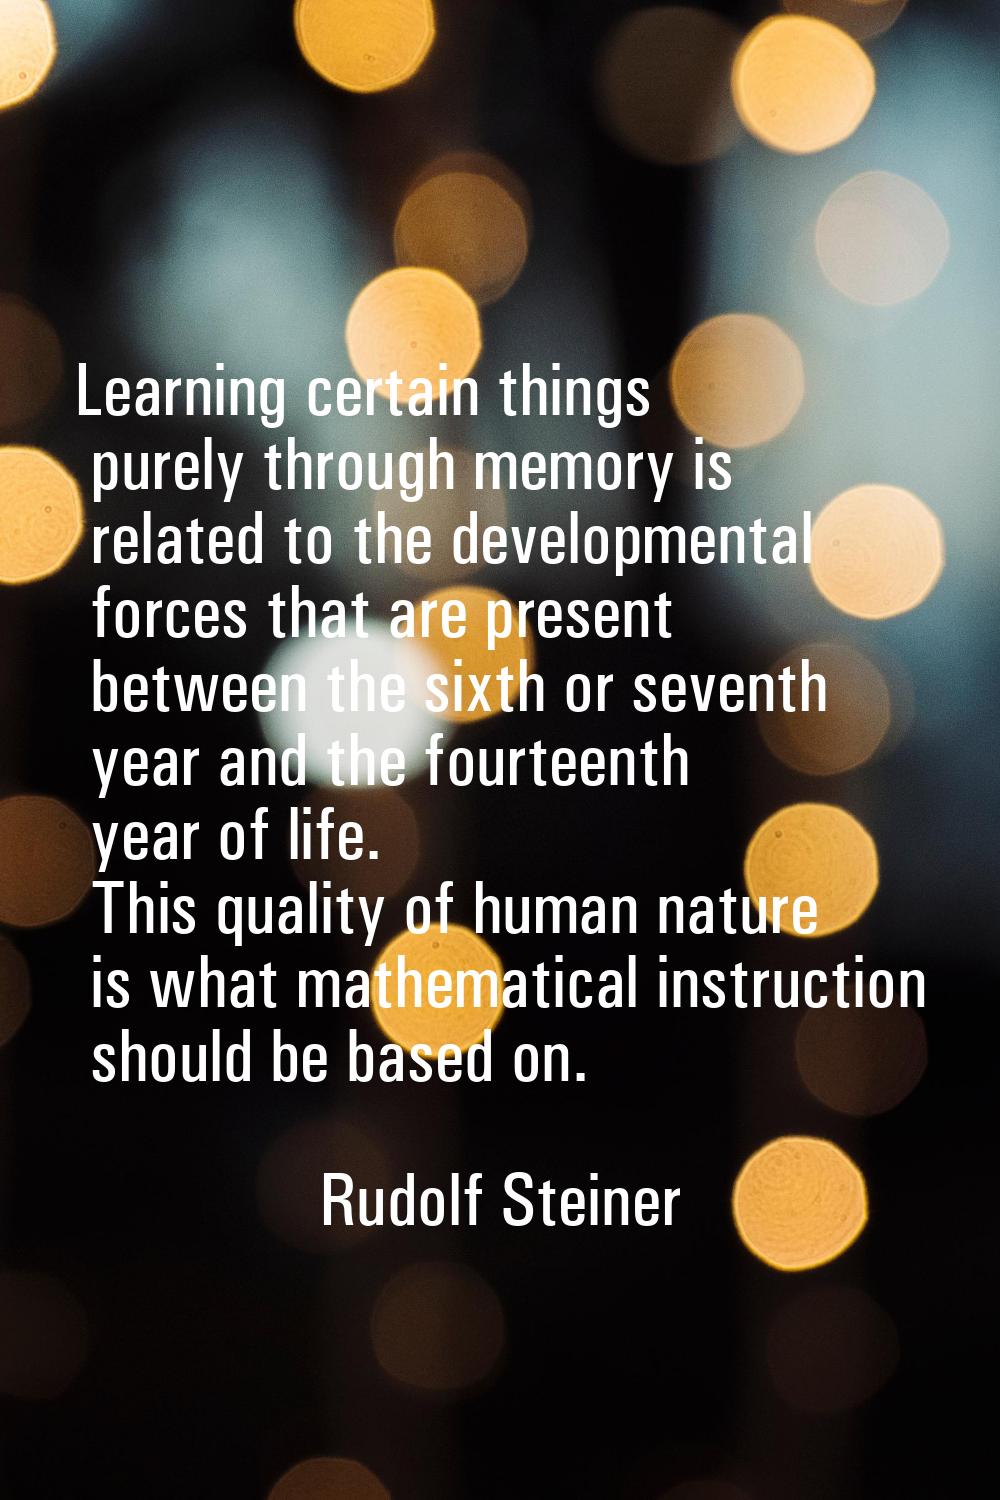 Learning certain things purely through memory is related to the developmental forces that are prese